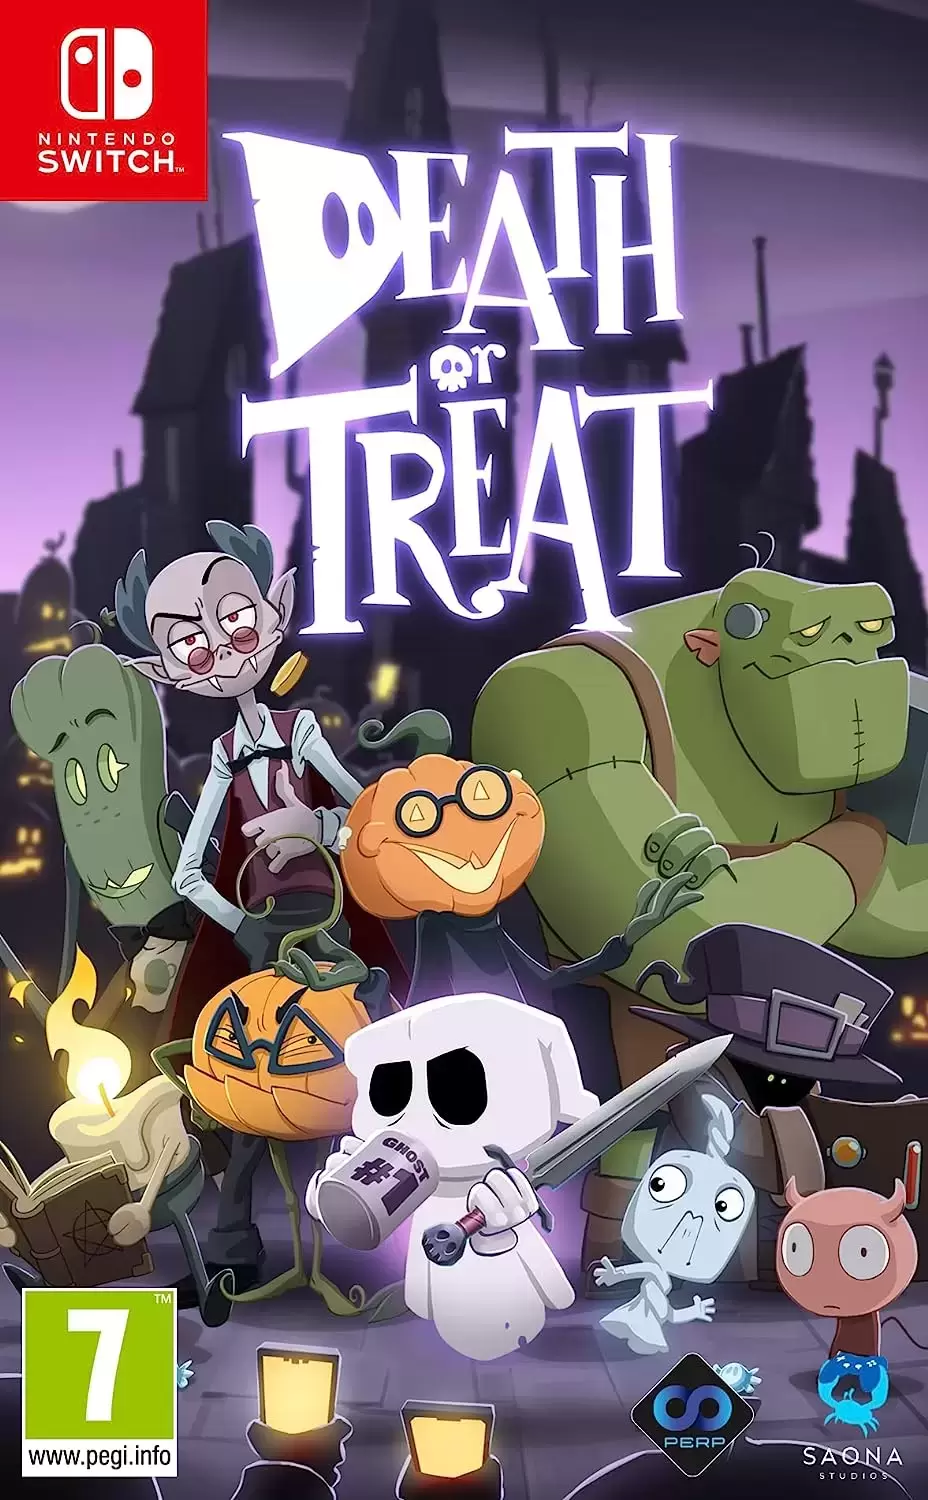 Nintendo Switch Games - Death Or Treat